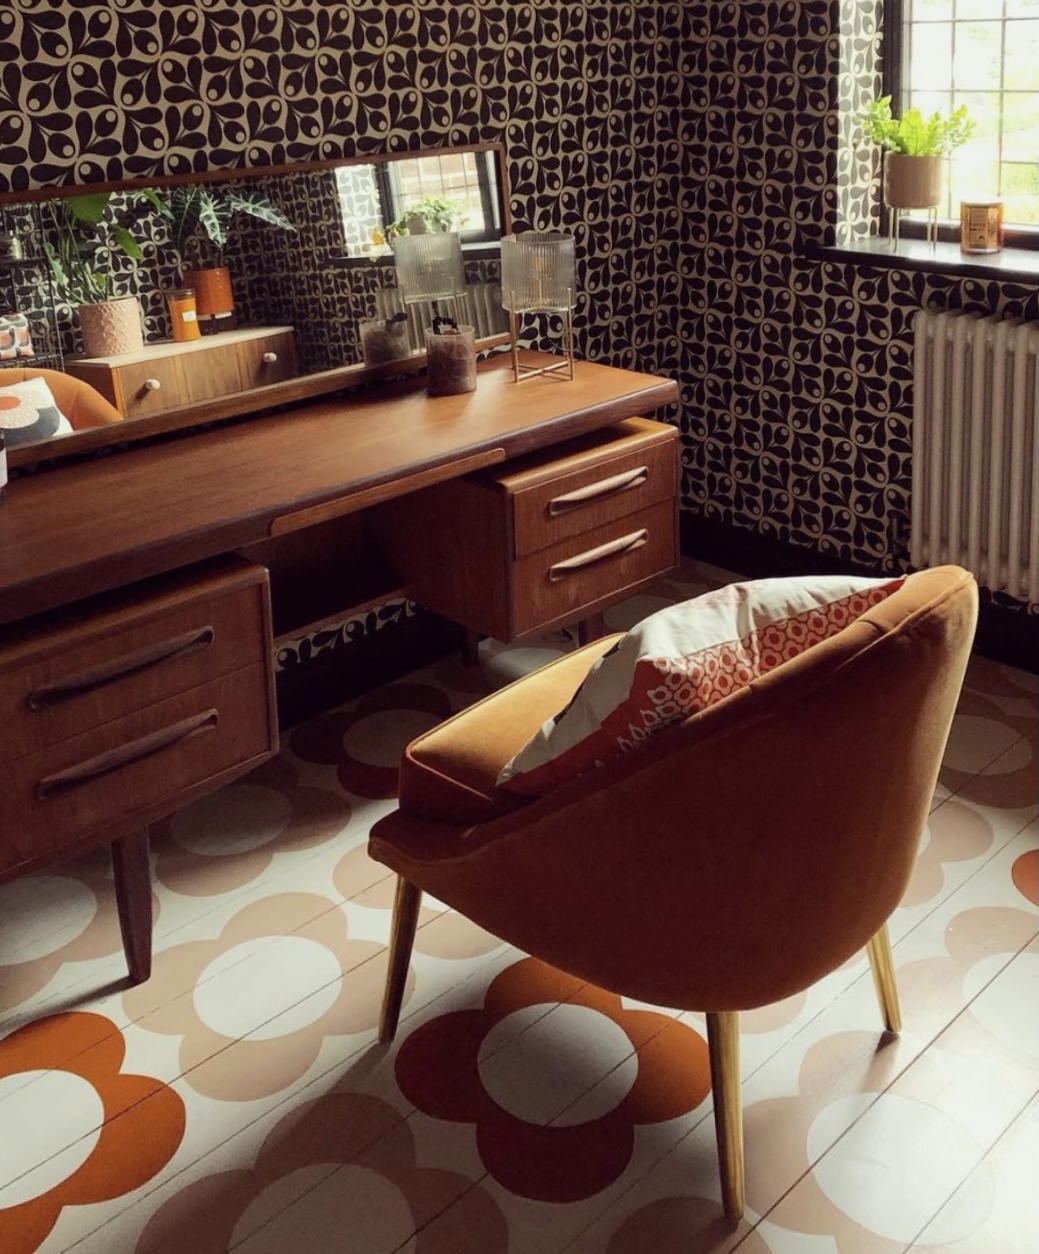 painted orla kiely floor by Emma Cooper from @ahouseonashbank